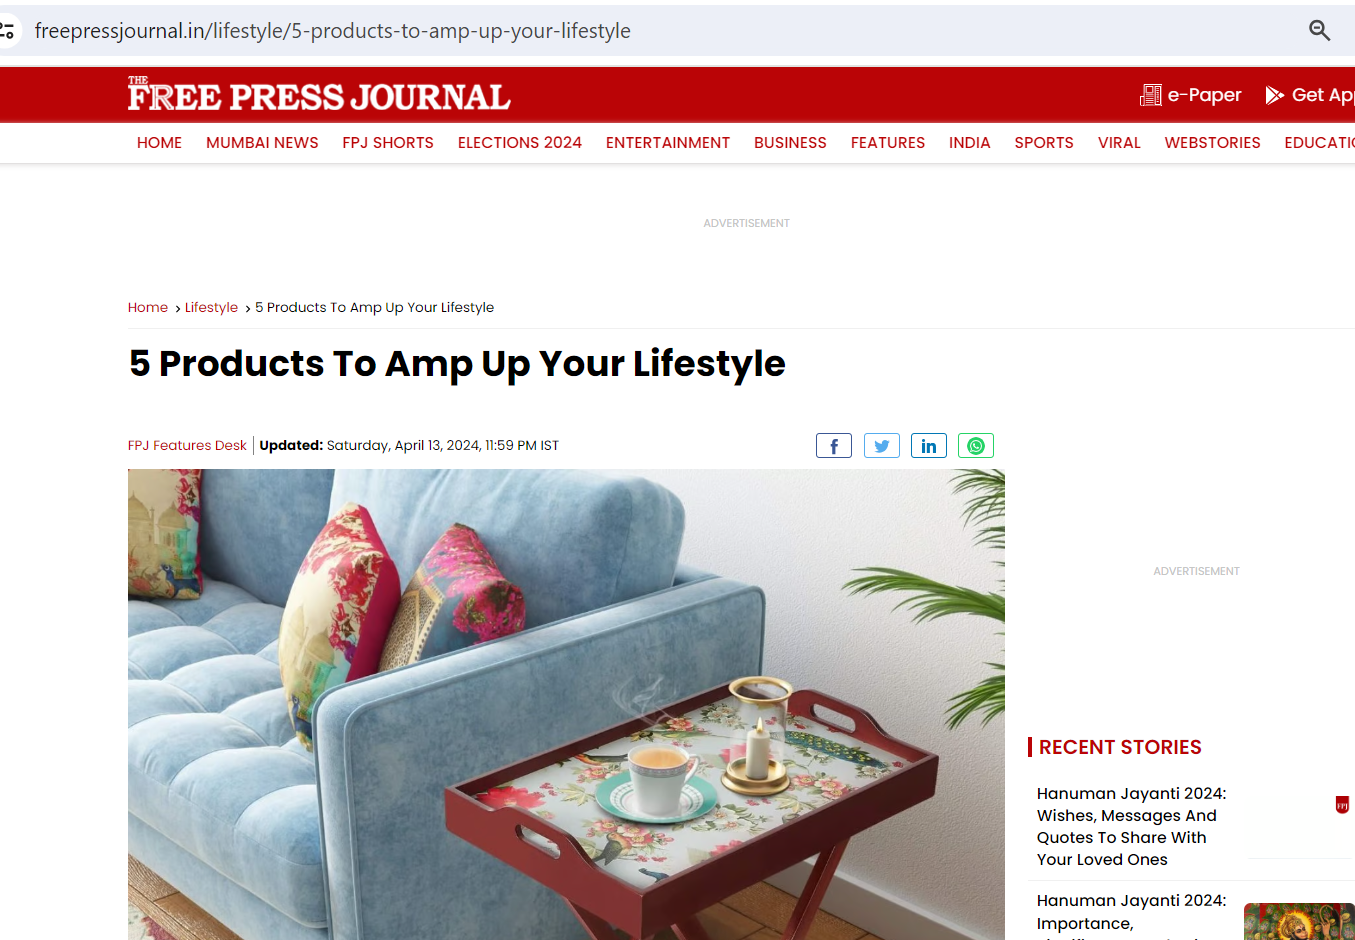 5 Products To Amp Up Your Lifestyle - Free Press Journal, April 2024